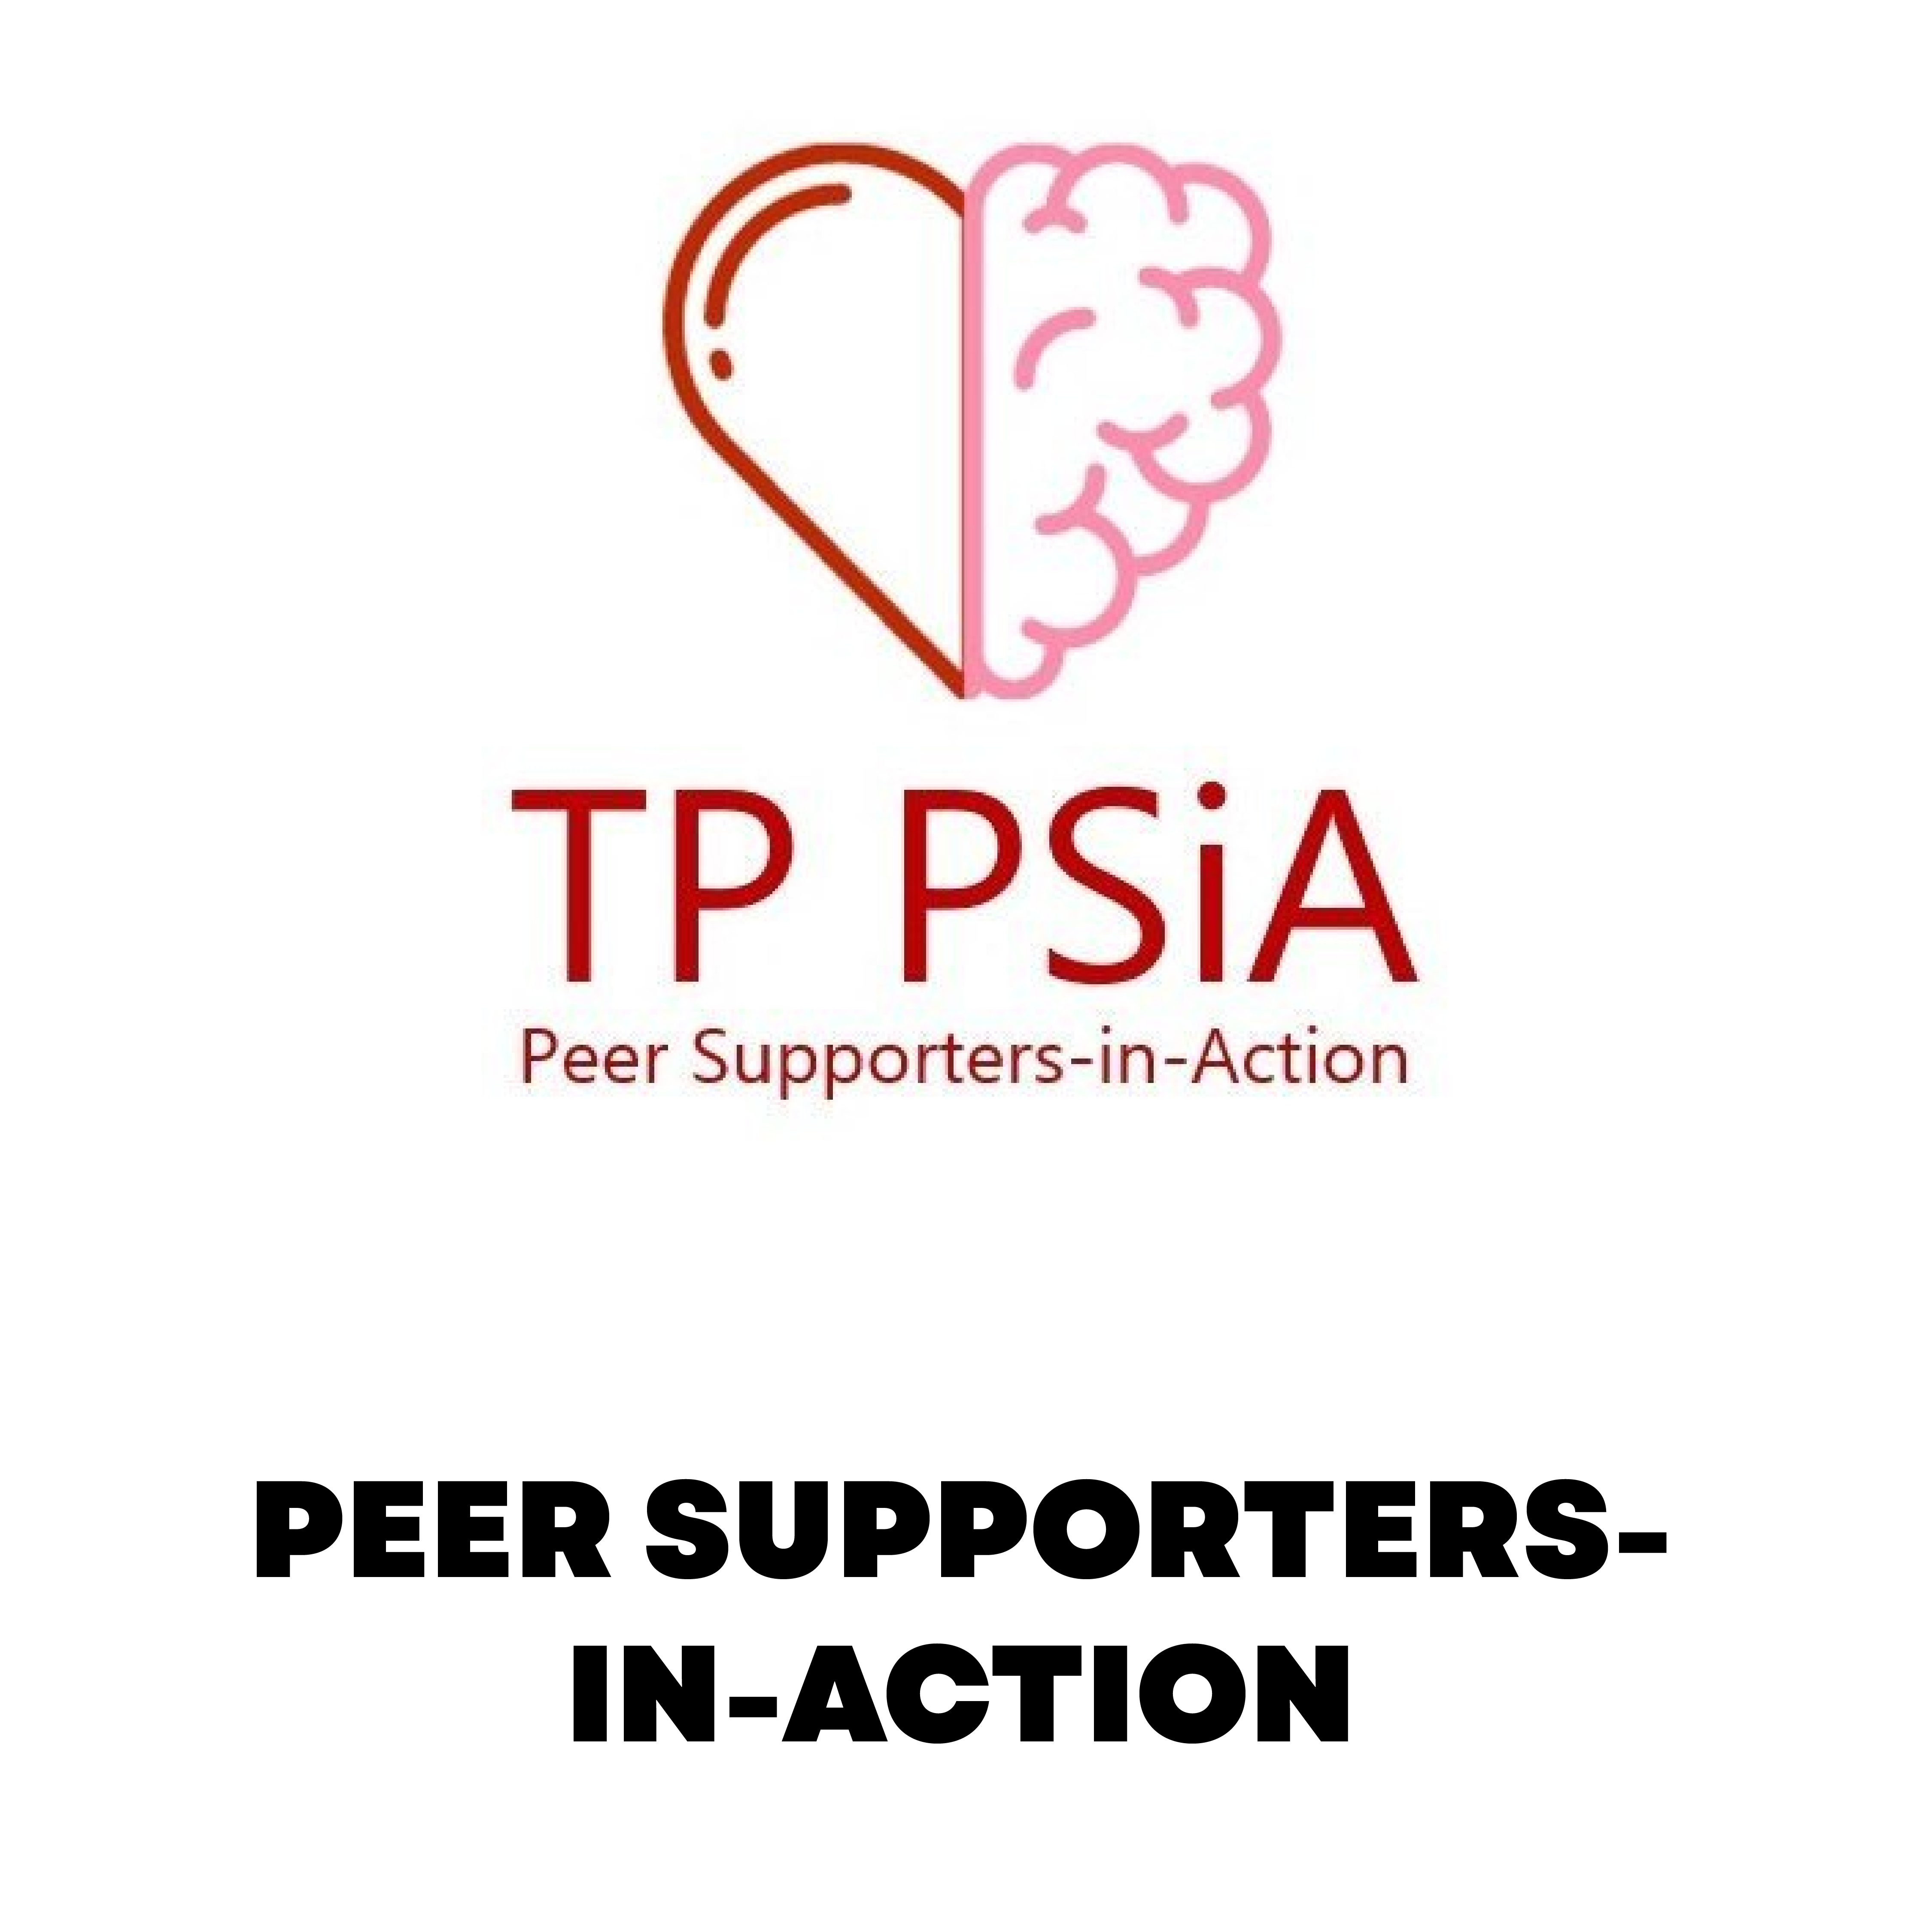 Peer Supporters-in-Action